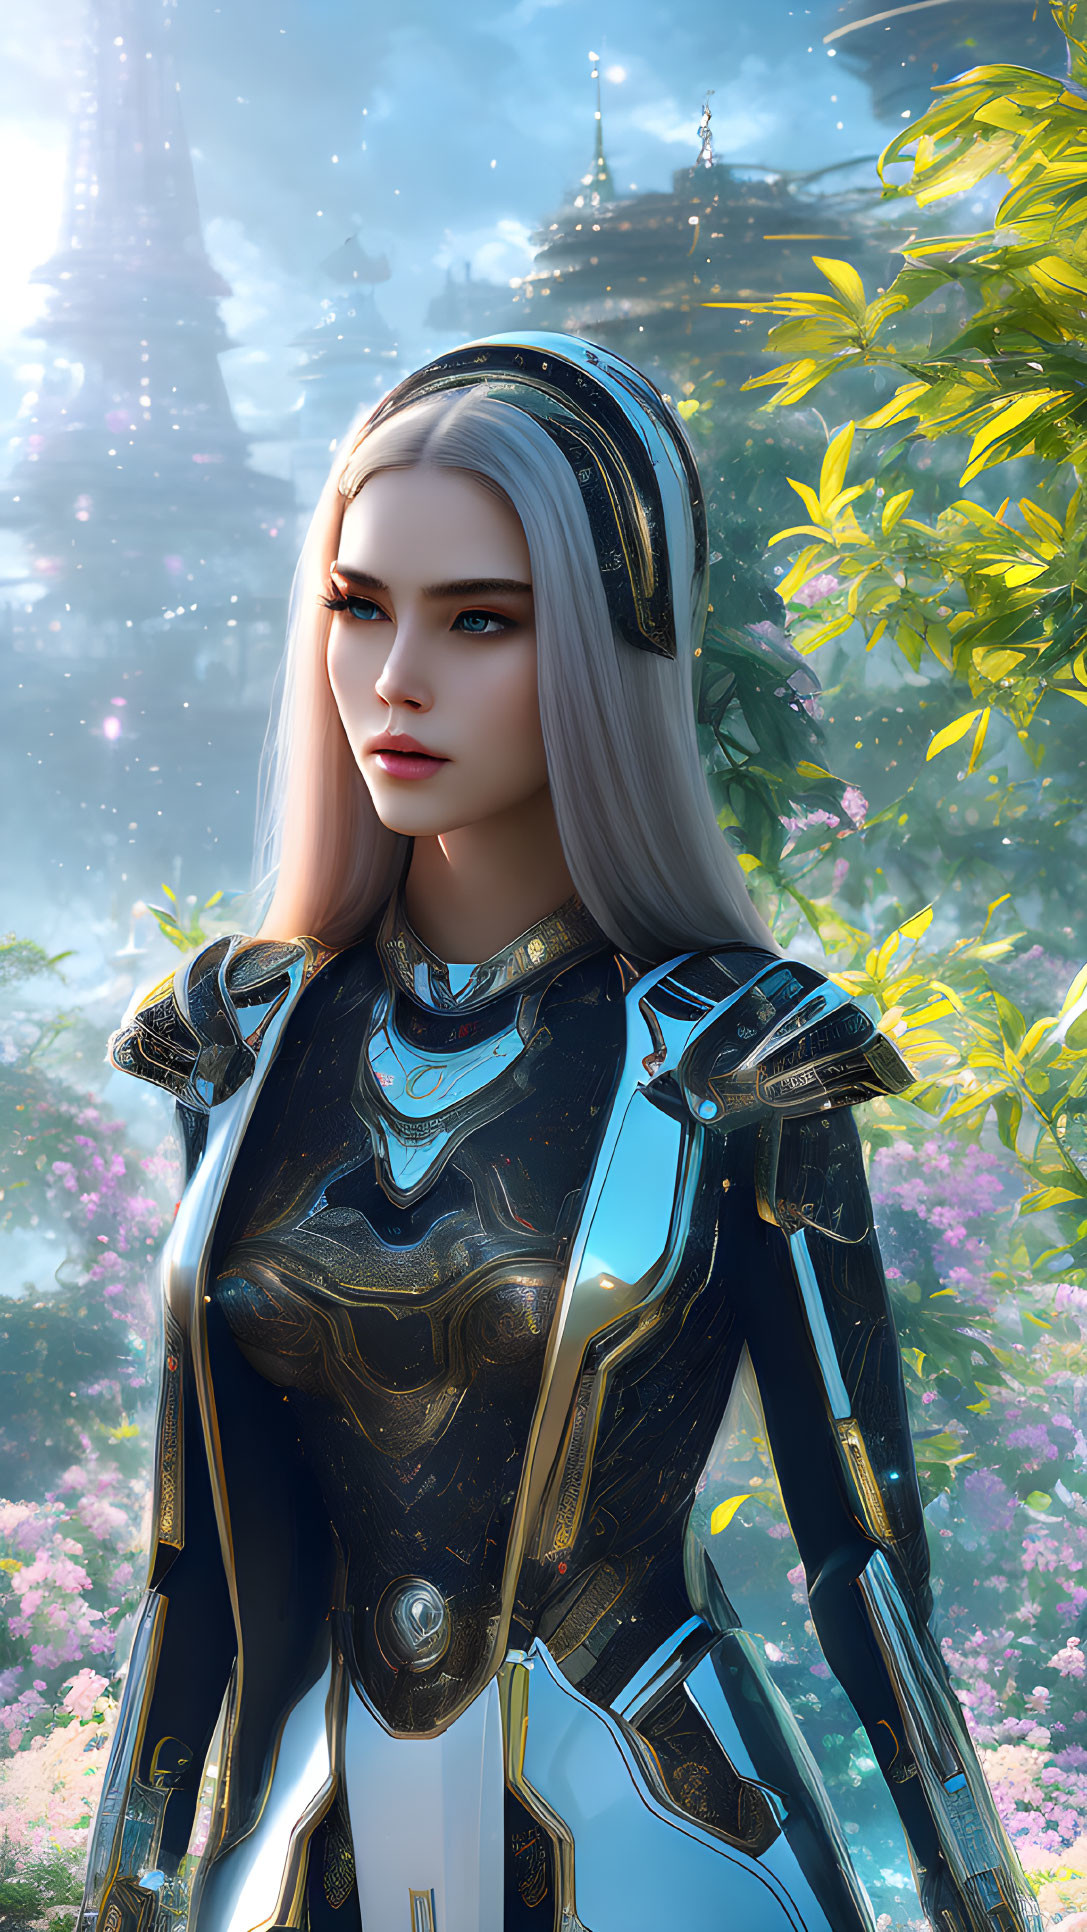 Futuristic female character in silver hair and blue-gold armor in magical garden